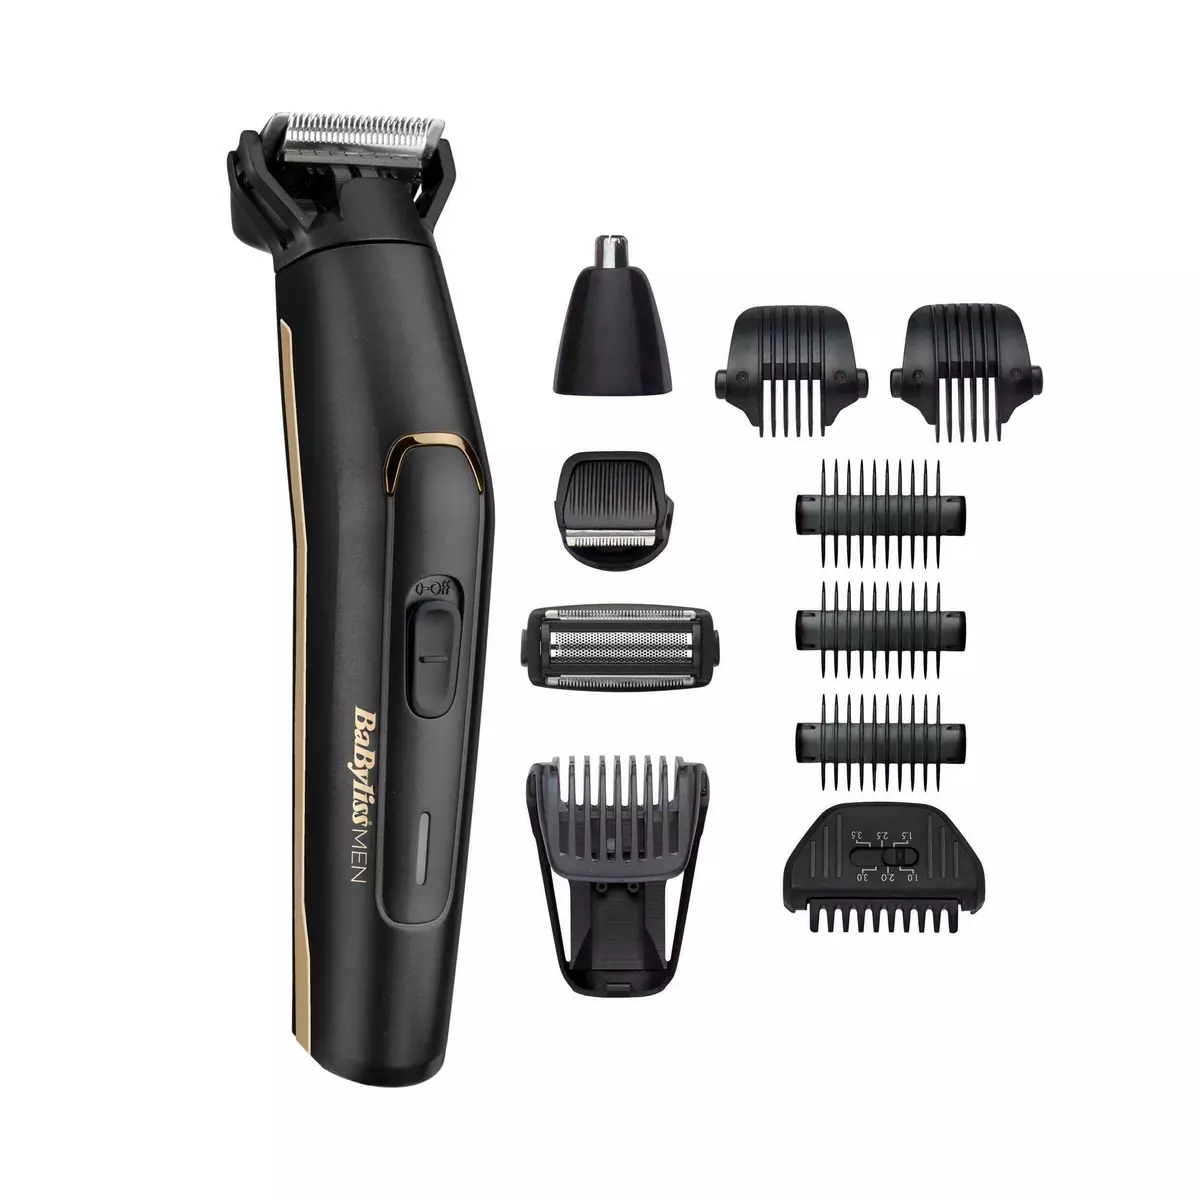 Tondeuse Multifonction Rechargeable BABYLISS Waterproof